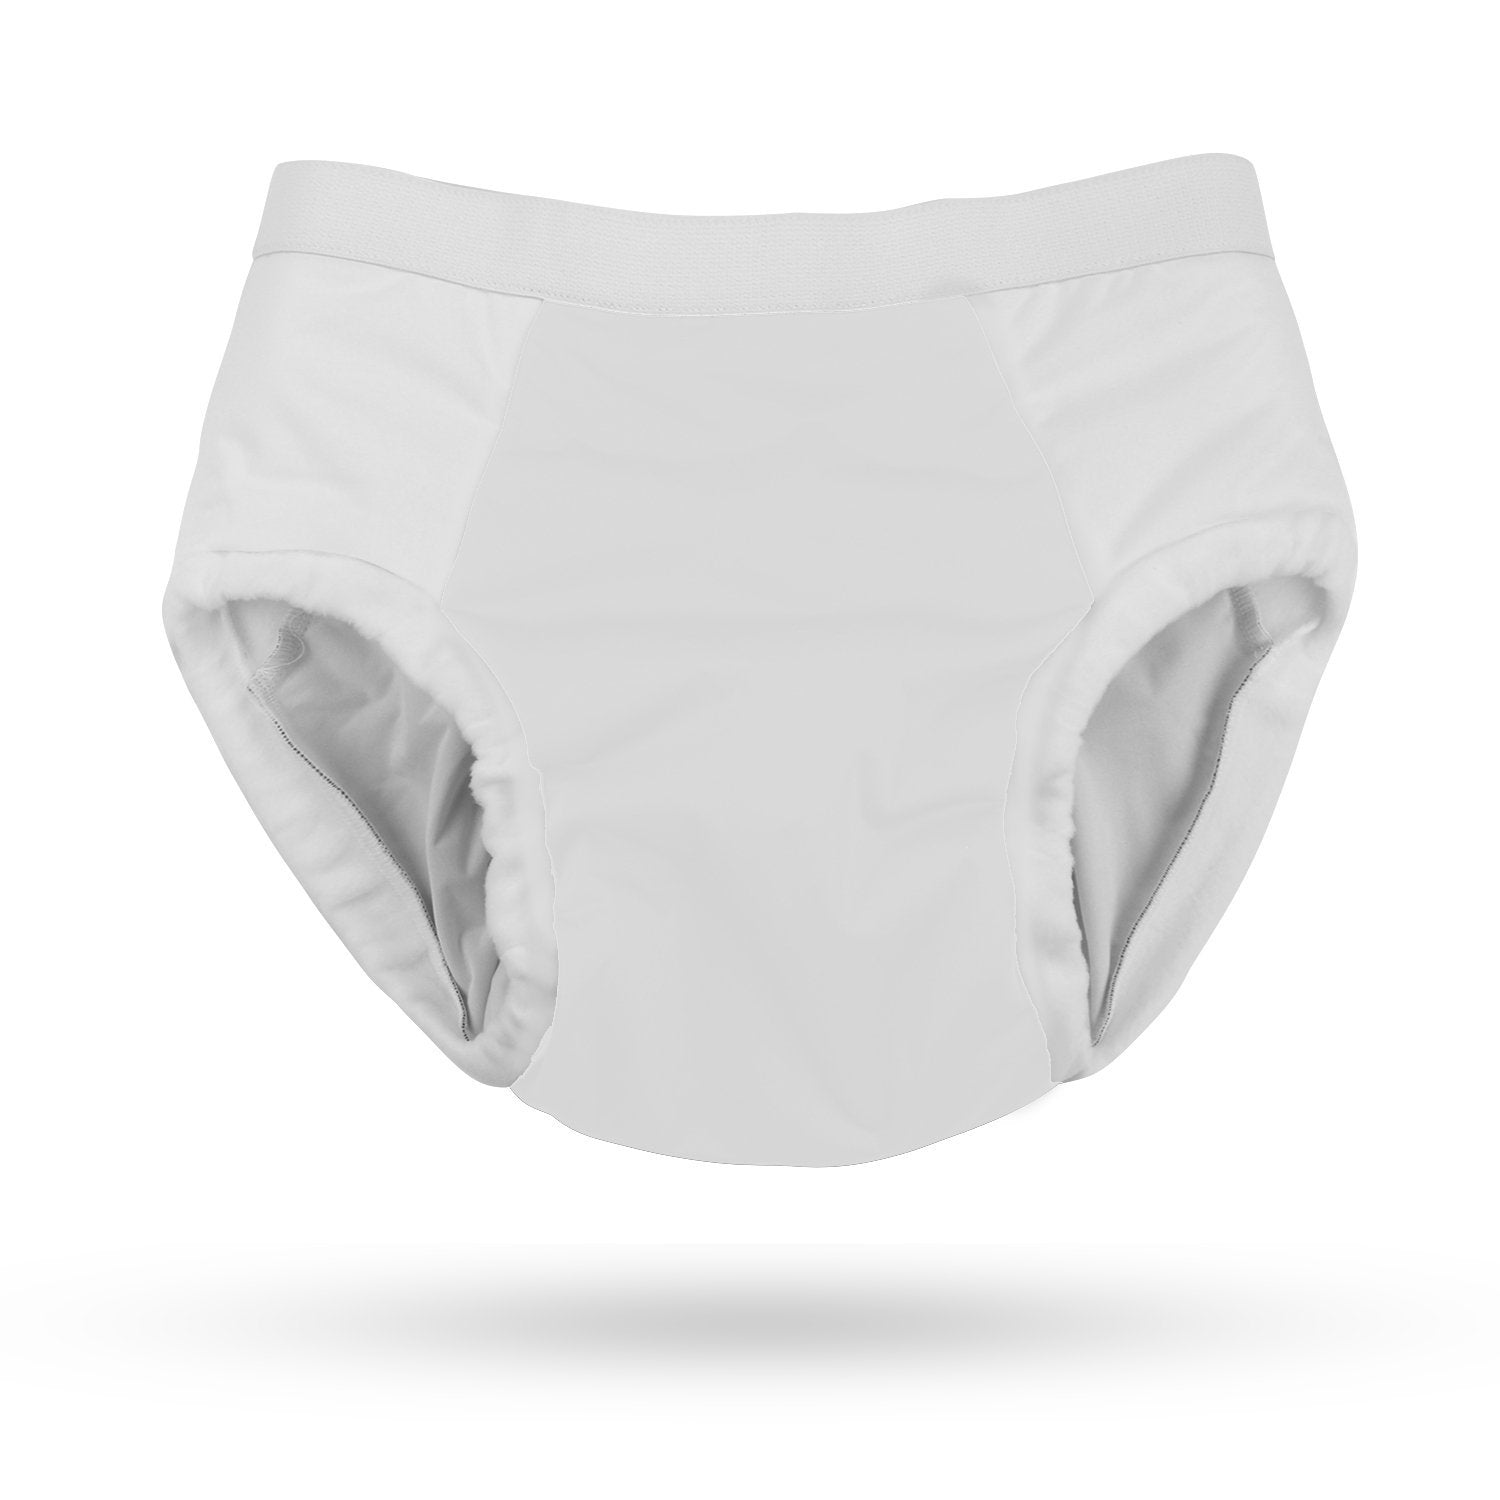 Washable Diapers For Incontinence – ThreadedArmor